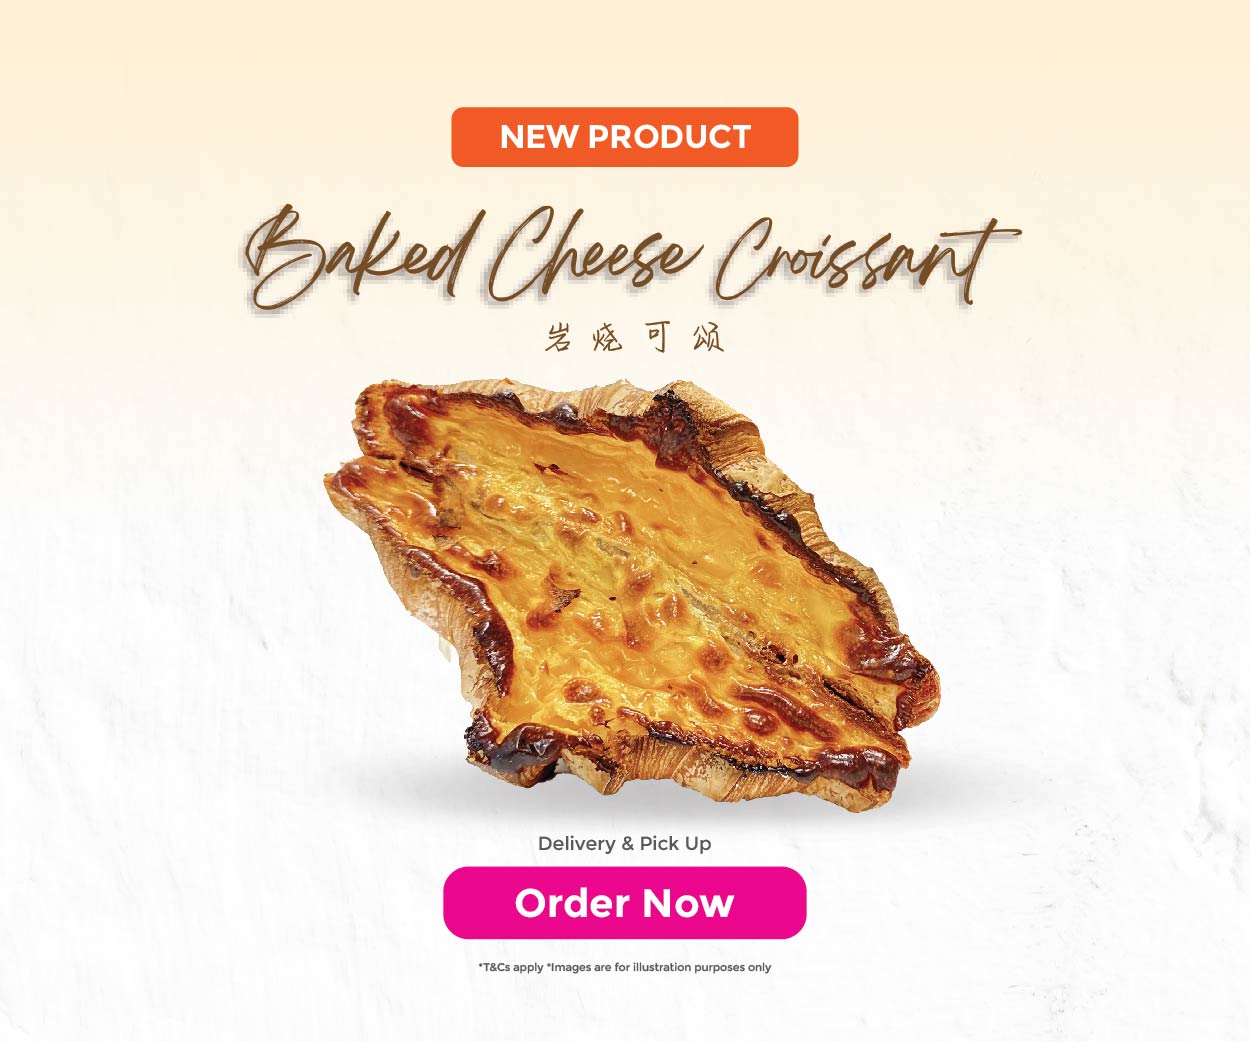 baked cheese croissant web banner mobile-01